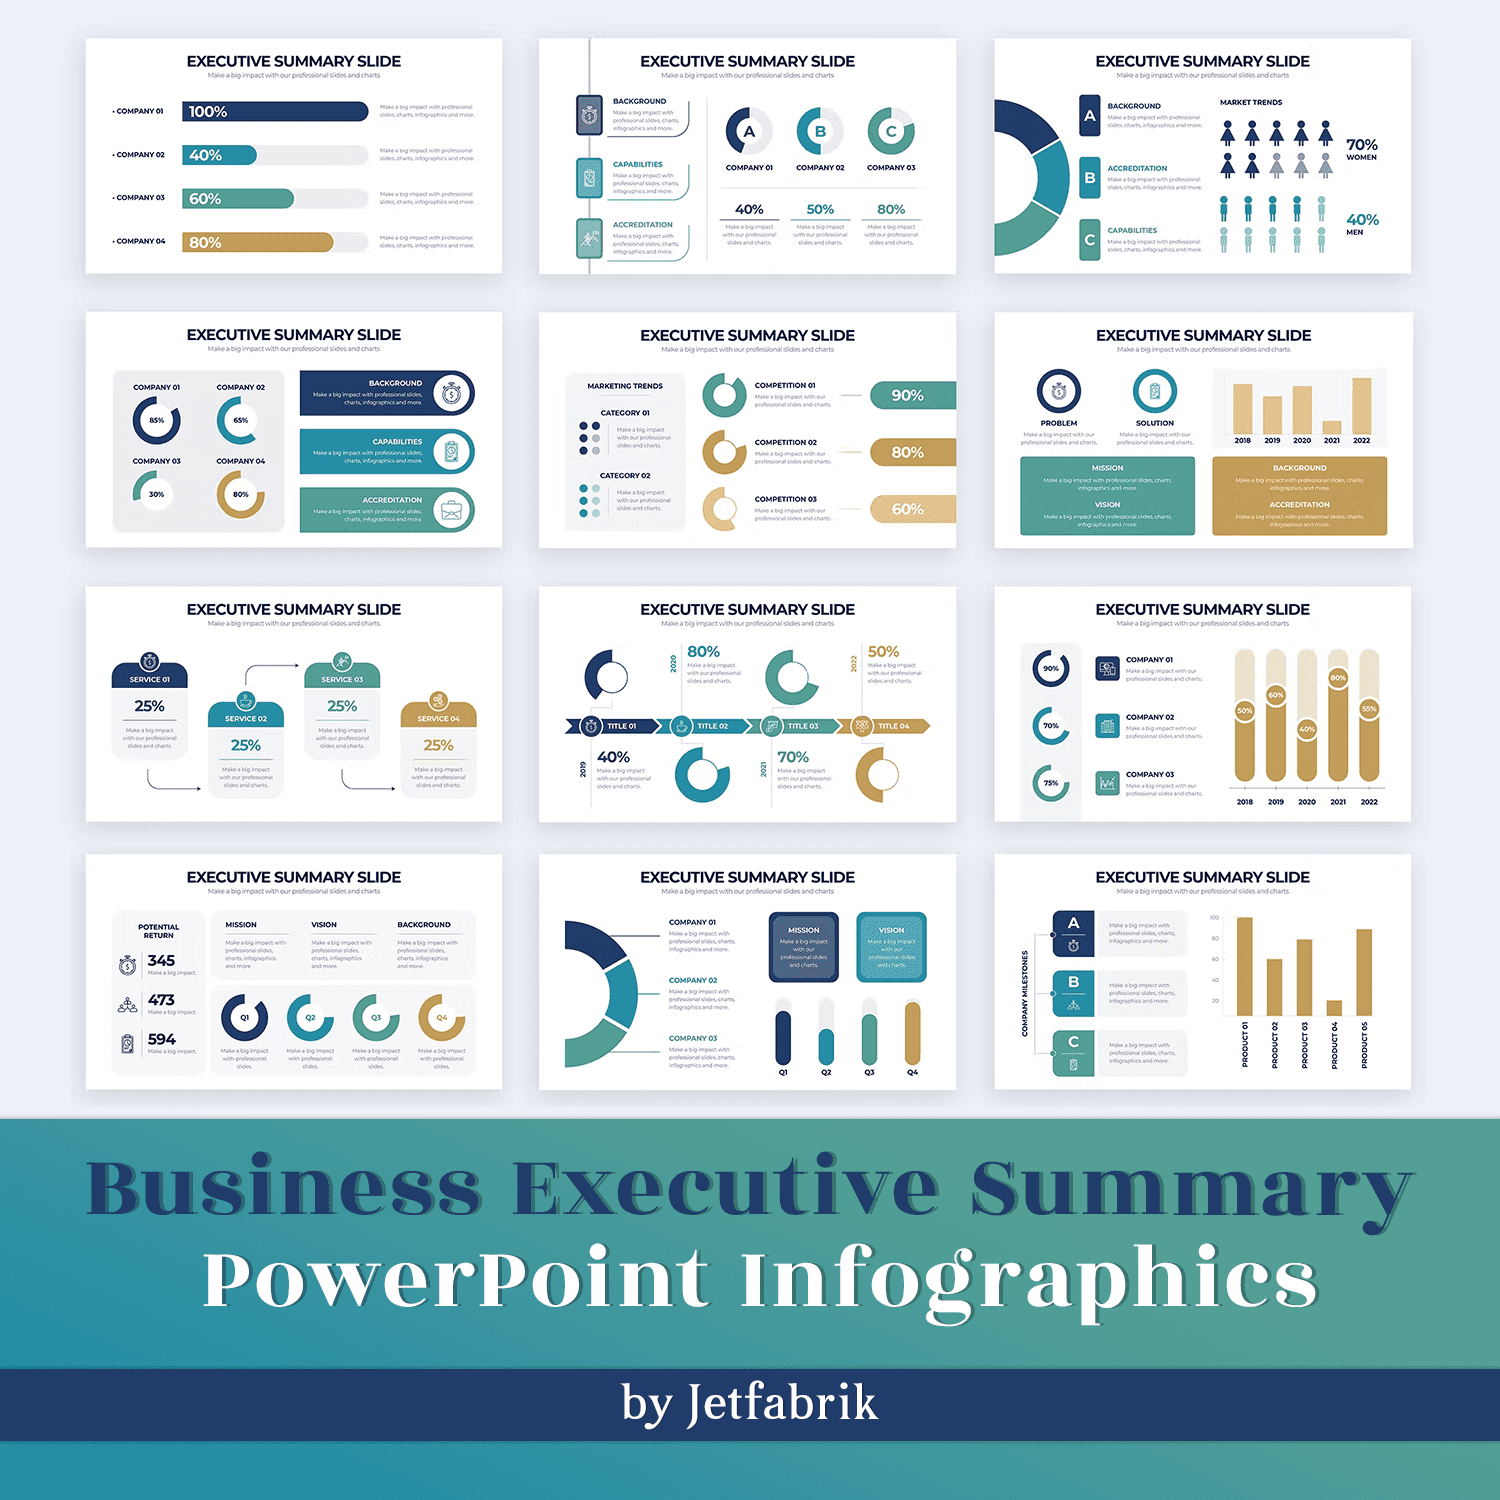 Business Executive Summary PowerPoint Infographics Cover.